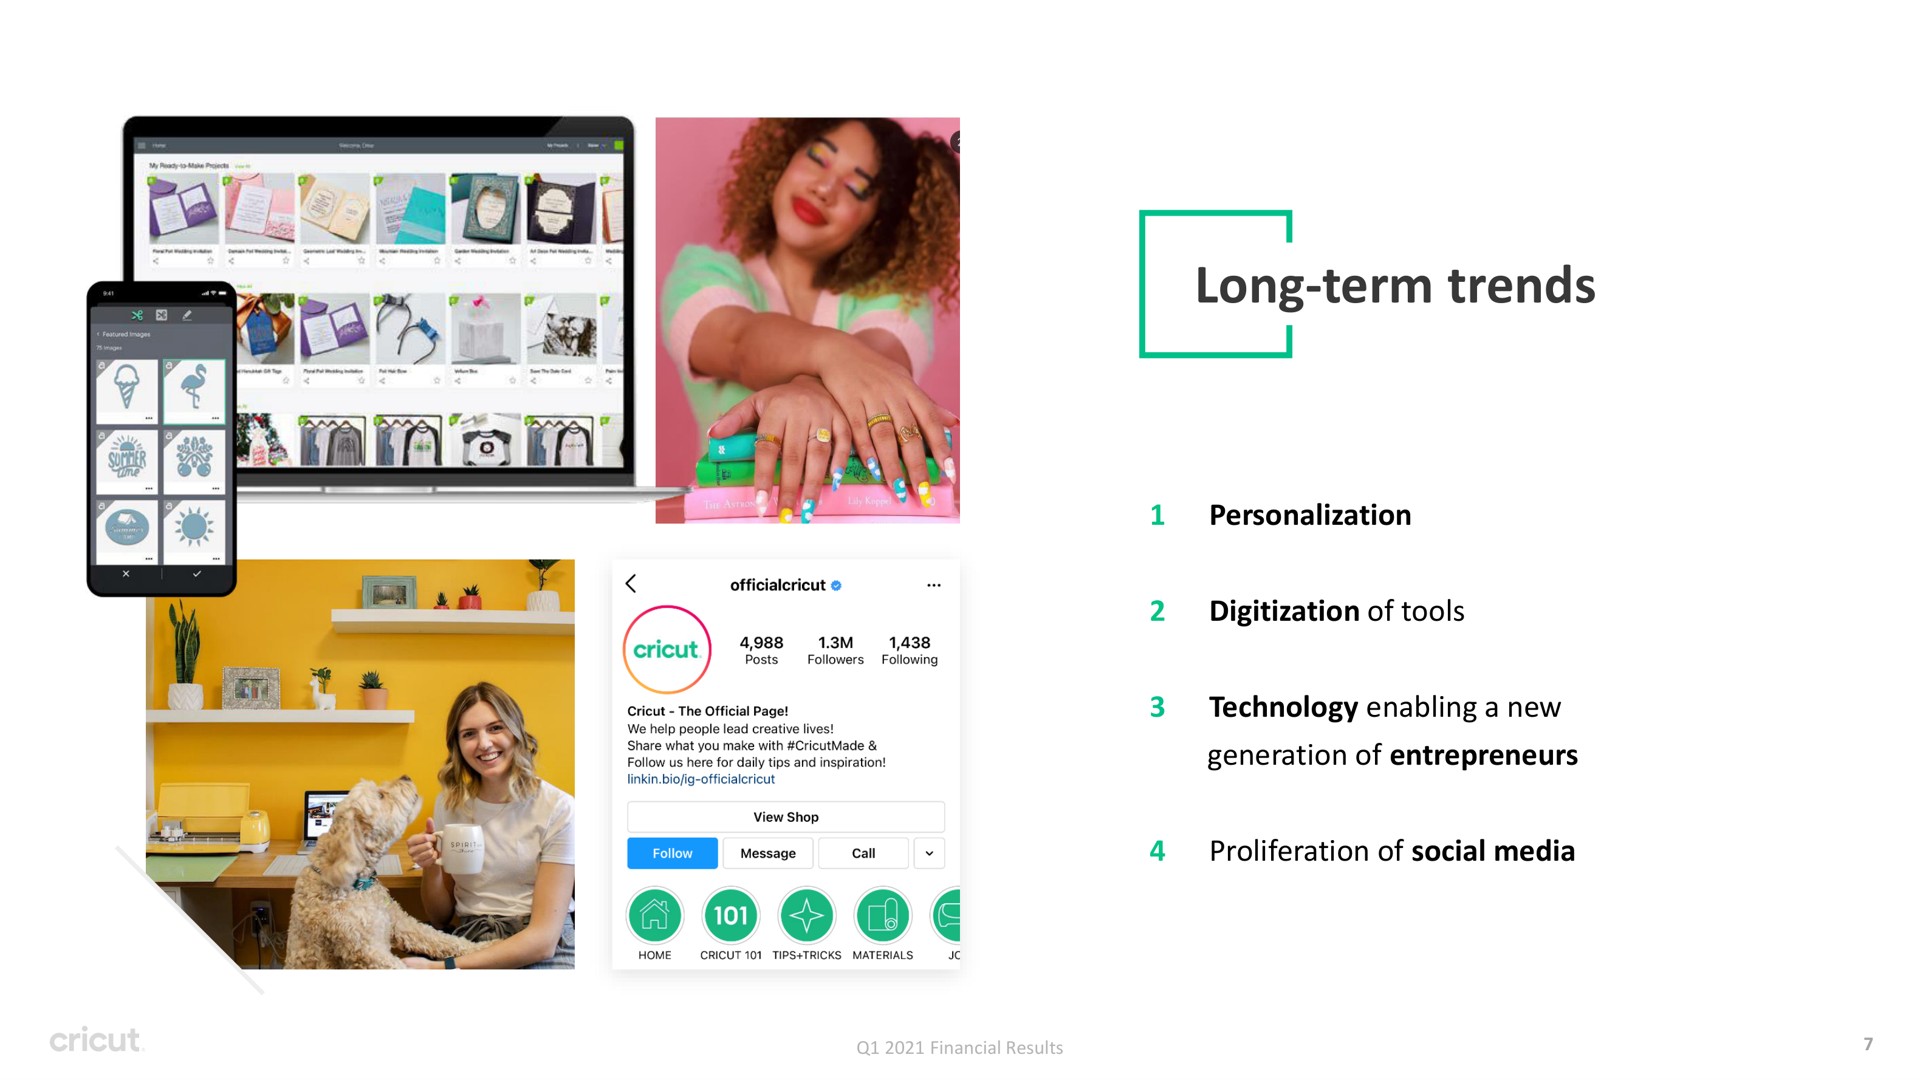 long term trends pech followers following posts the page we help people lead creative for and era home message view shop call tips tricks materials financial results personalization of tools technology enabling a new generation of entrepreneurs proliferation of social media | Circut